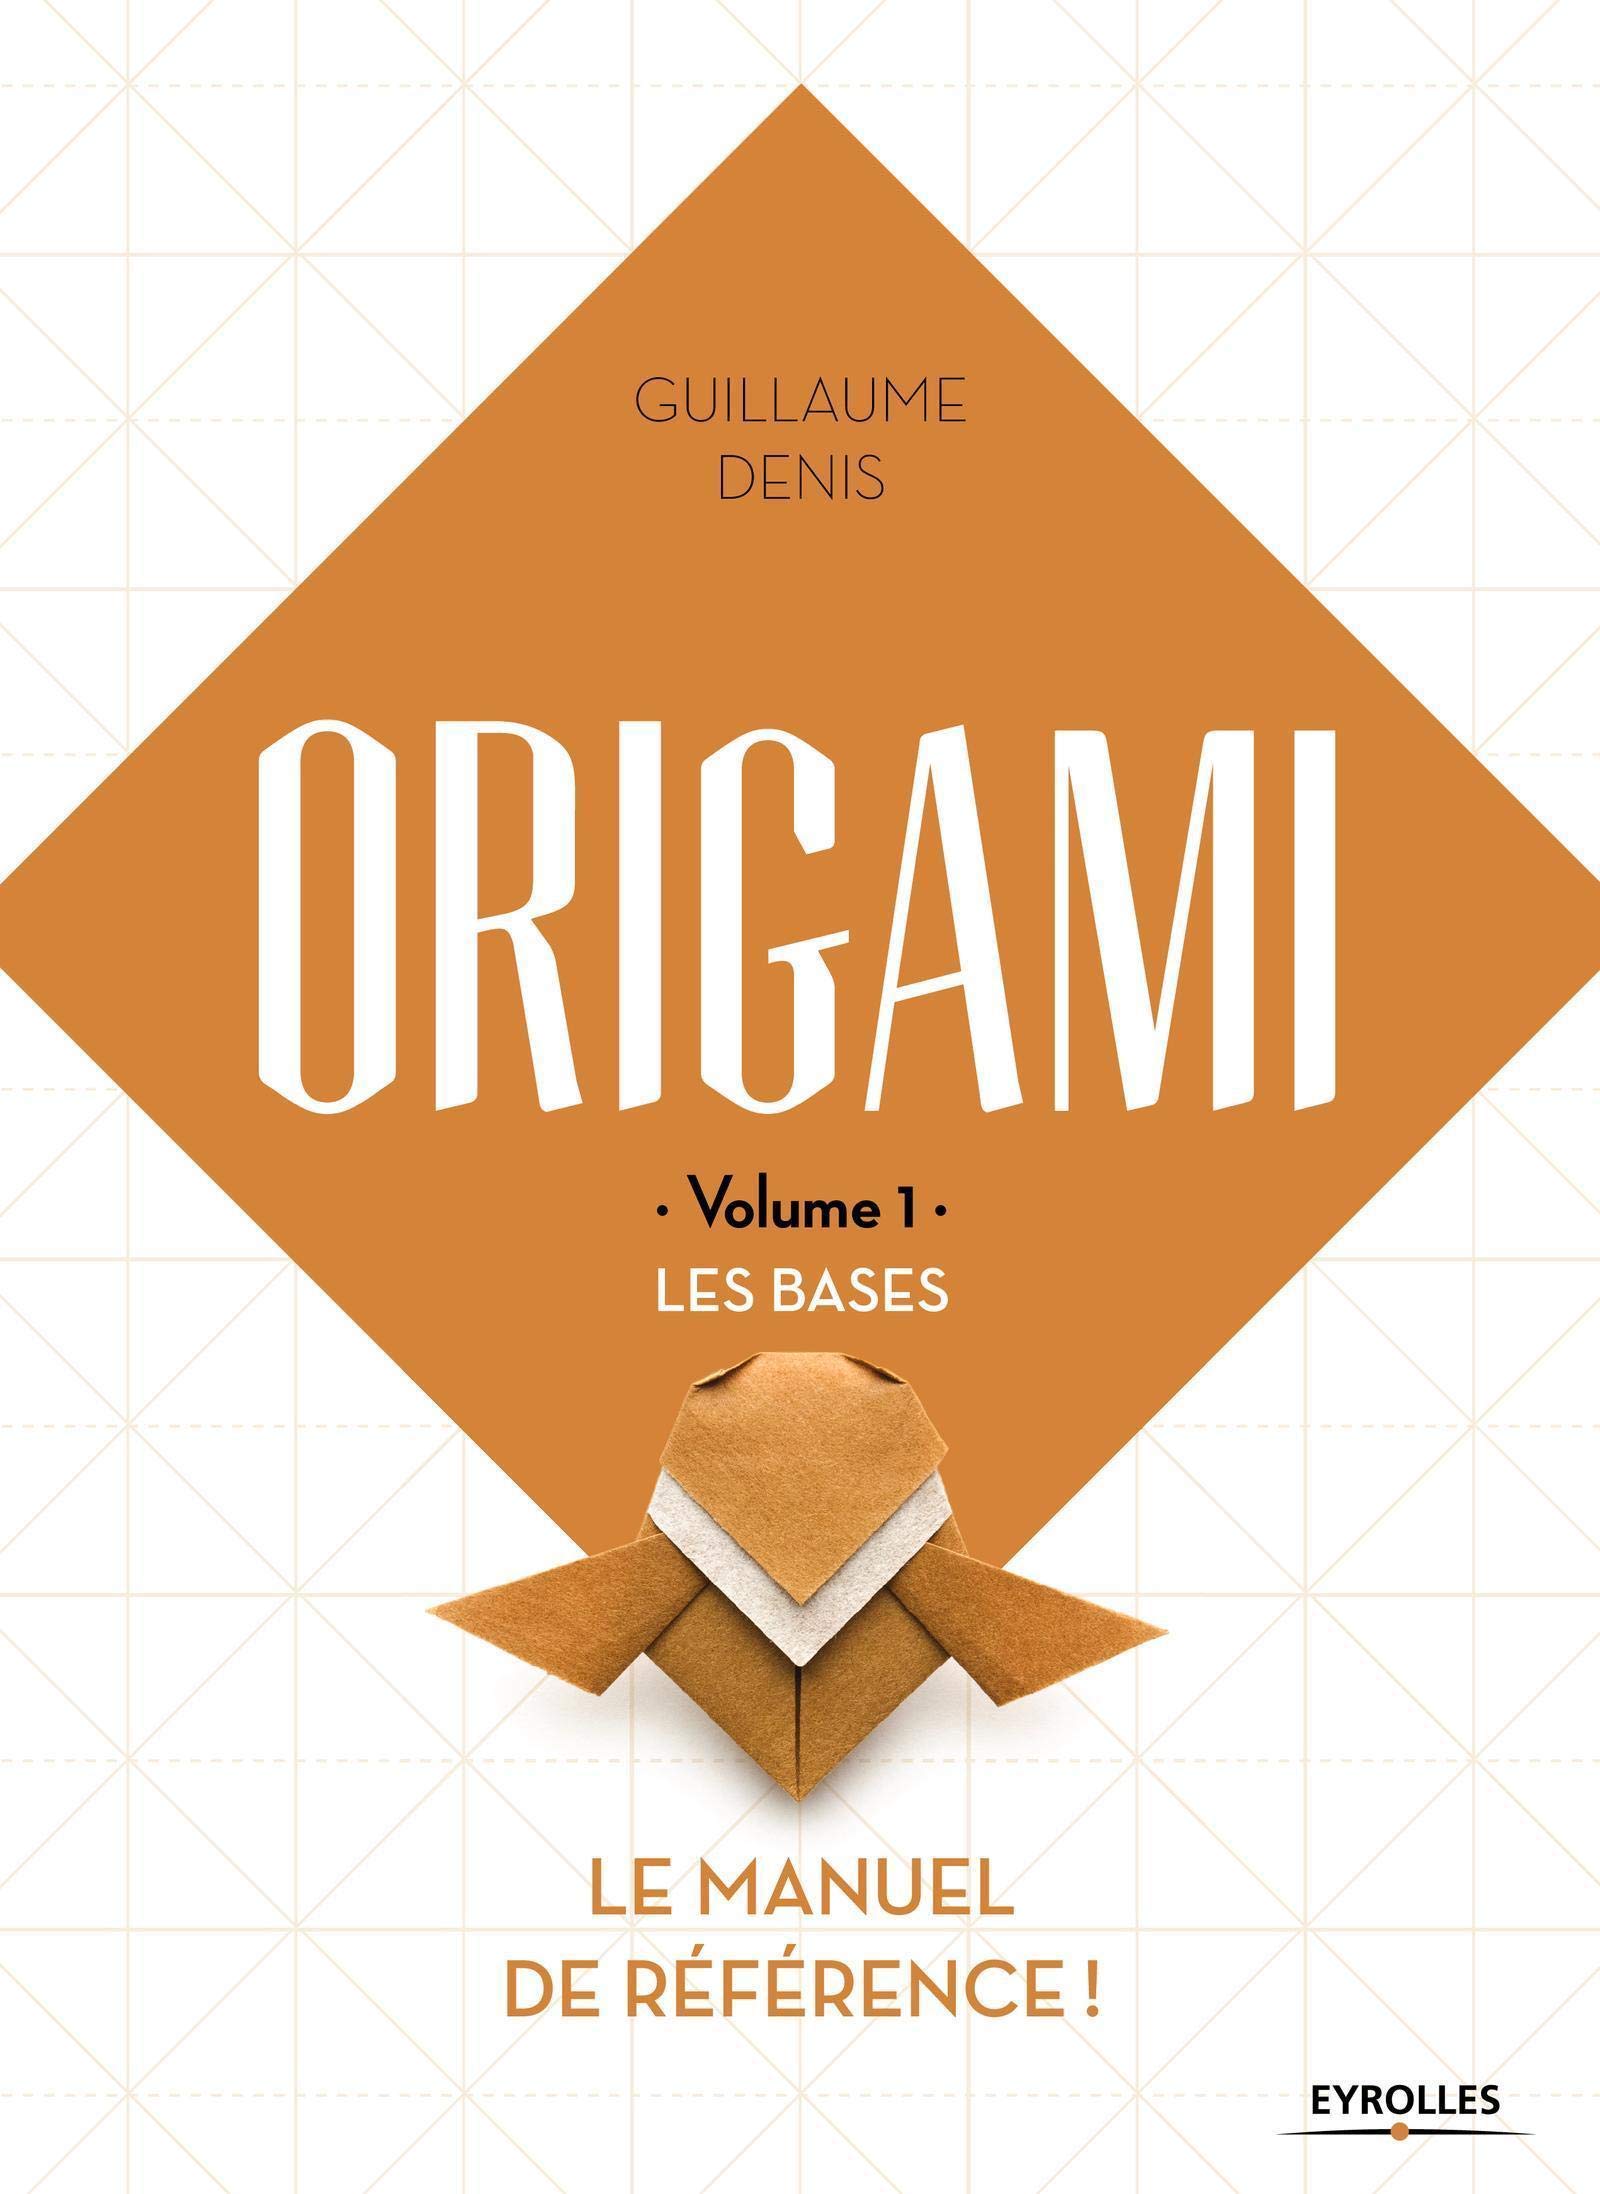 ORIGAMI - Volume 1 - LES BASES : page 124.